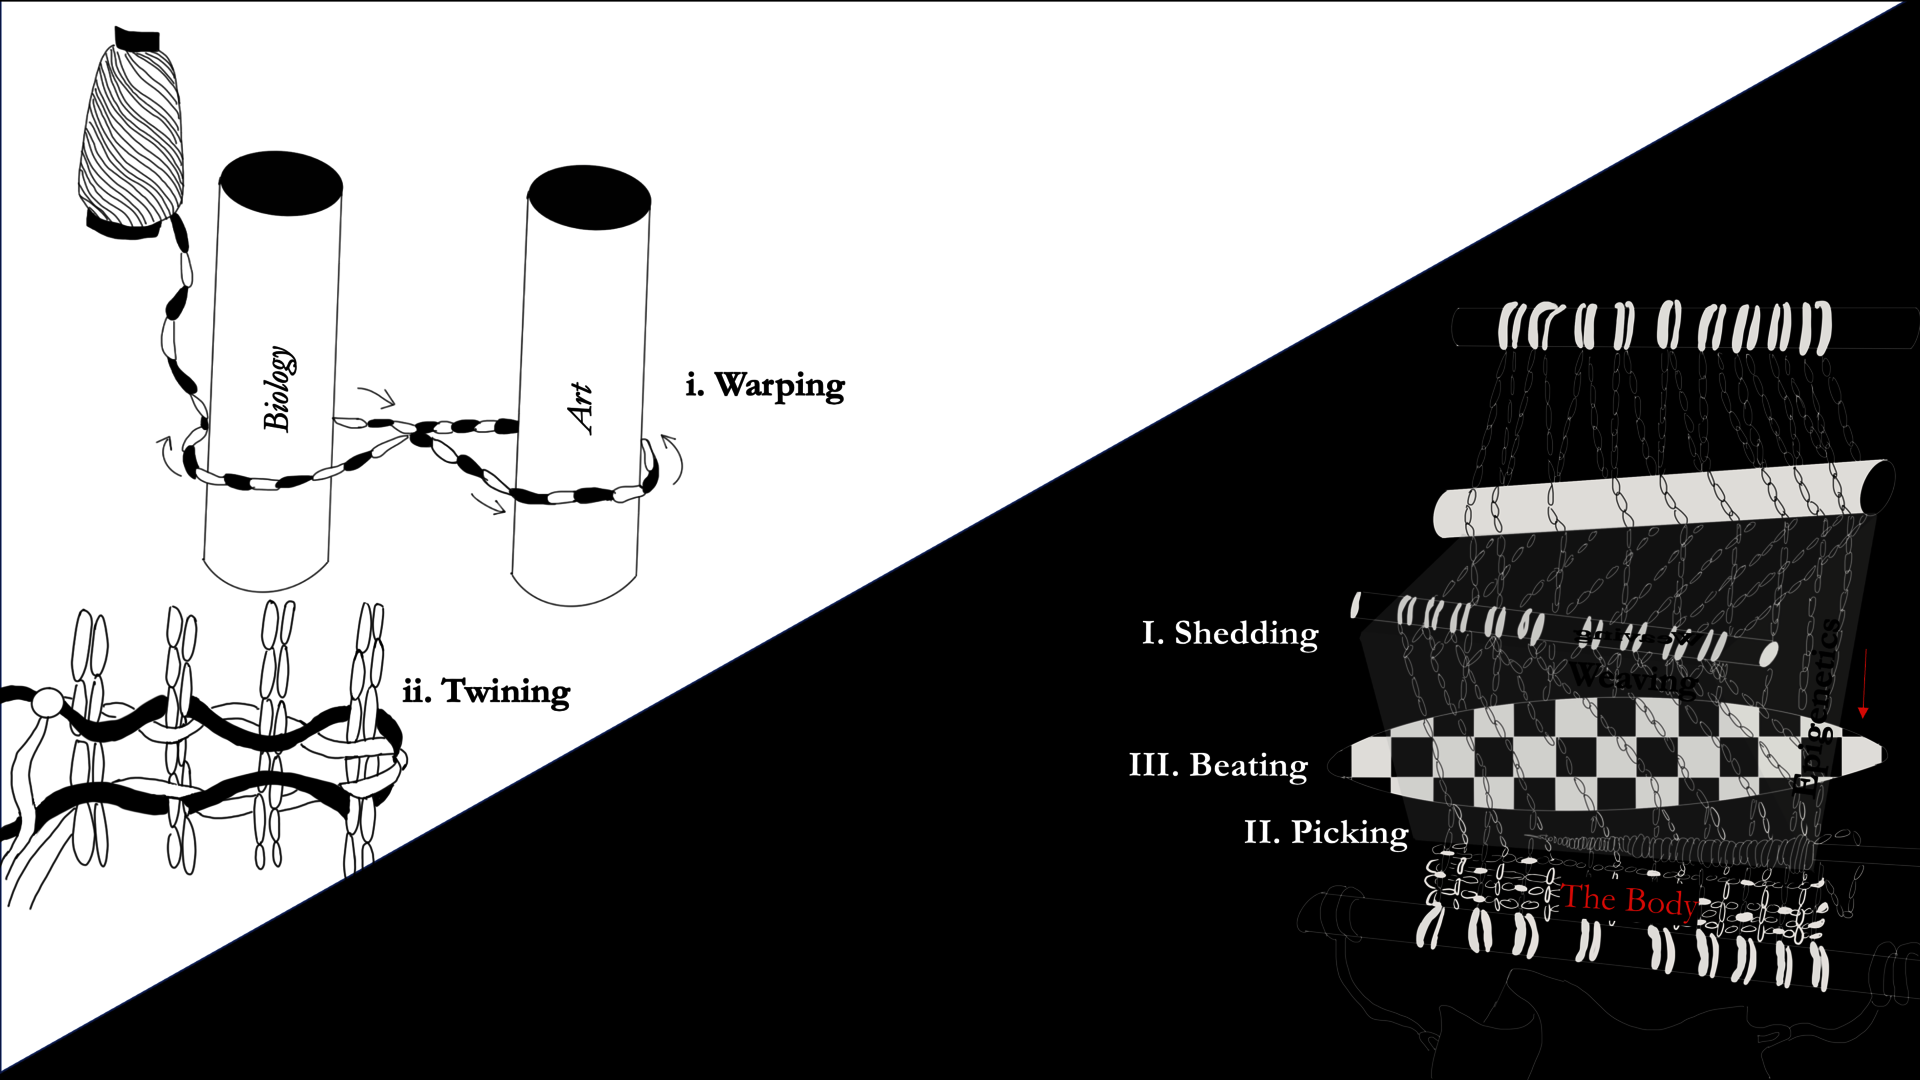 Diagram of the thesis structure as warping, shedding, beating, picking, and twining.